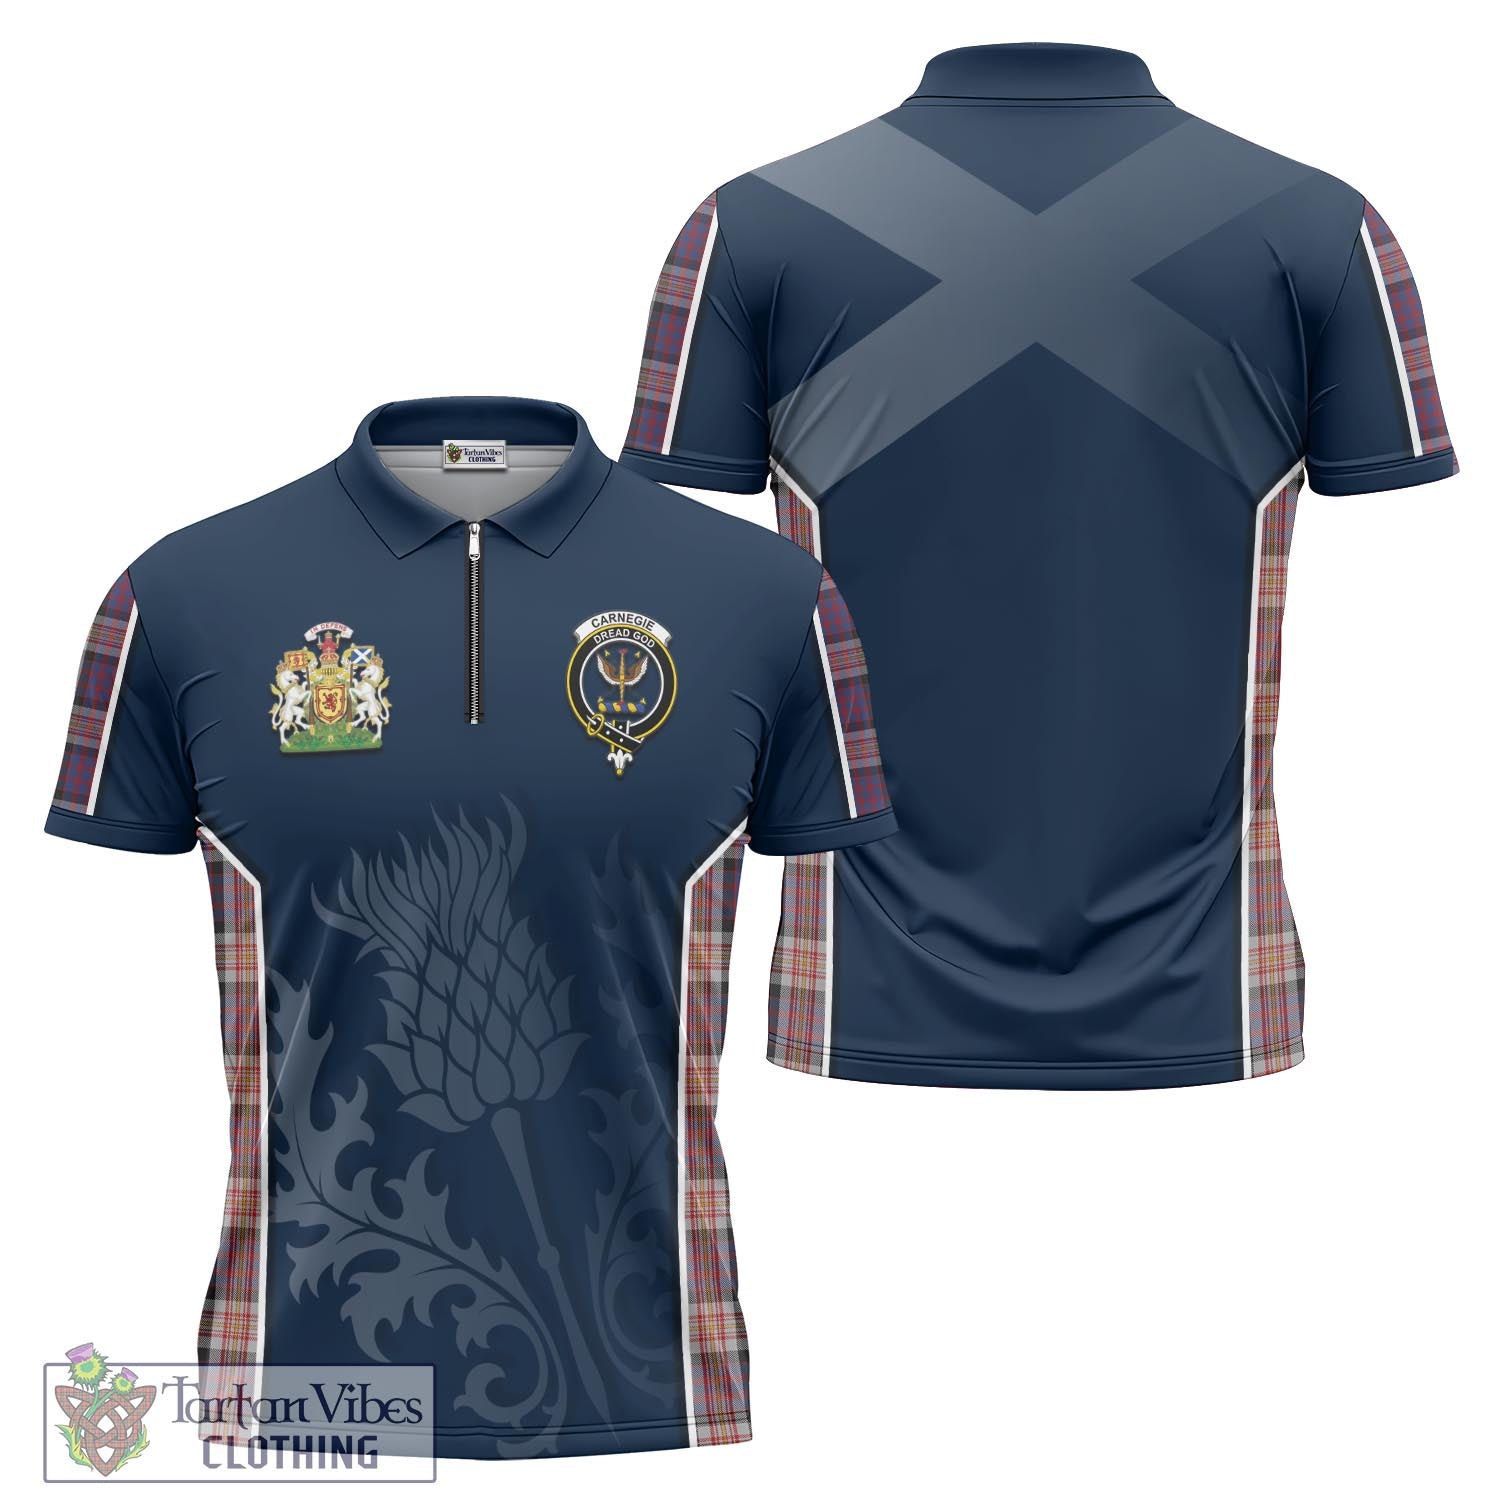 Tartan Vibes Clothing Carnegie Tartan Zipper Polo Shirt with Family Crest and Scottish Thistle Vibes Sport Style